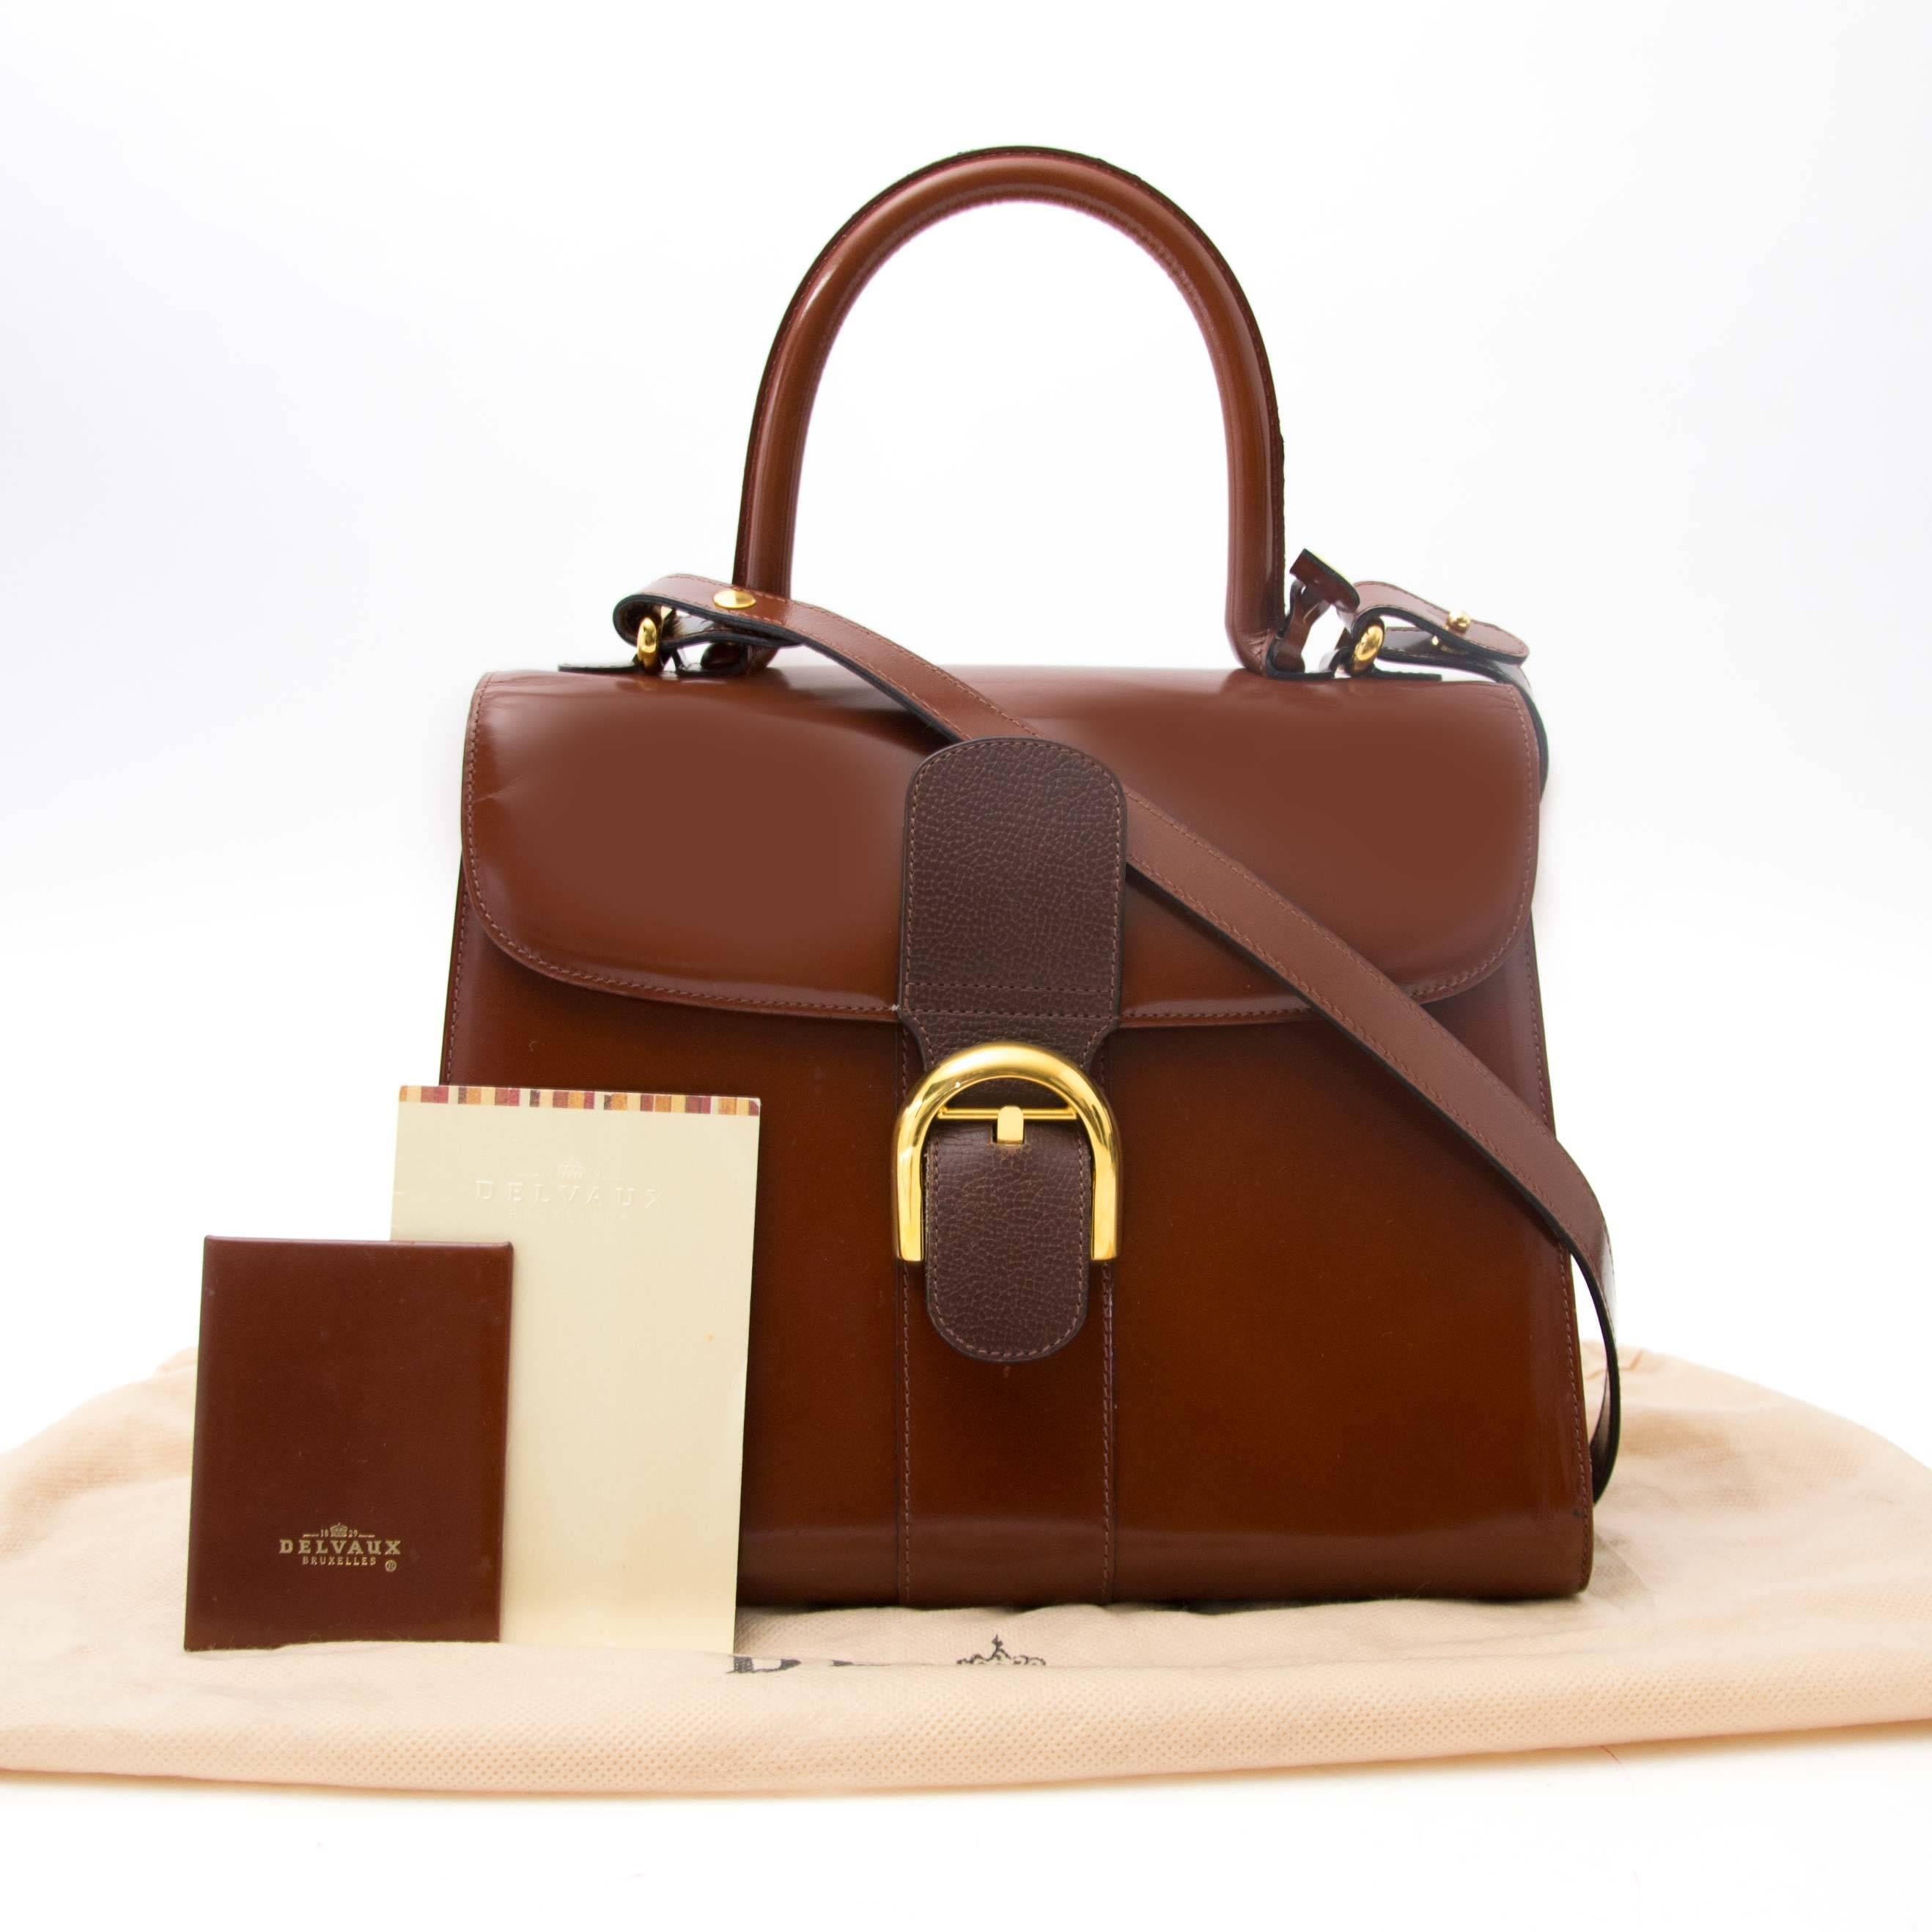 Very good preloved condition

Delvaux Brillant MM Bicolor Dark Brown - Marron + strap

The Brillant is known for its elegance and beautiful structure and especially with this bicolor combination. The bag opens with the classic gold 'D' buckle. This